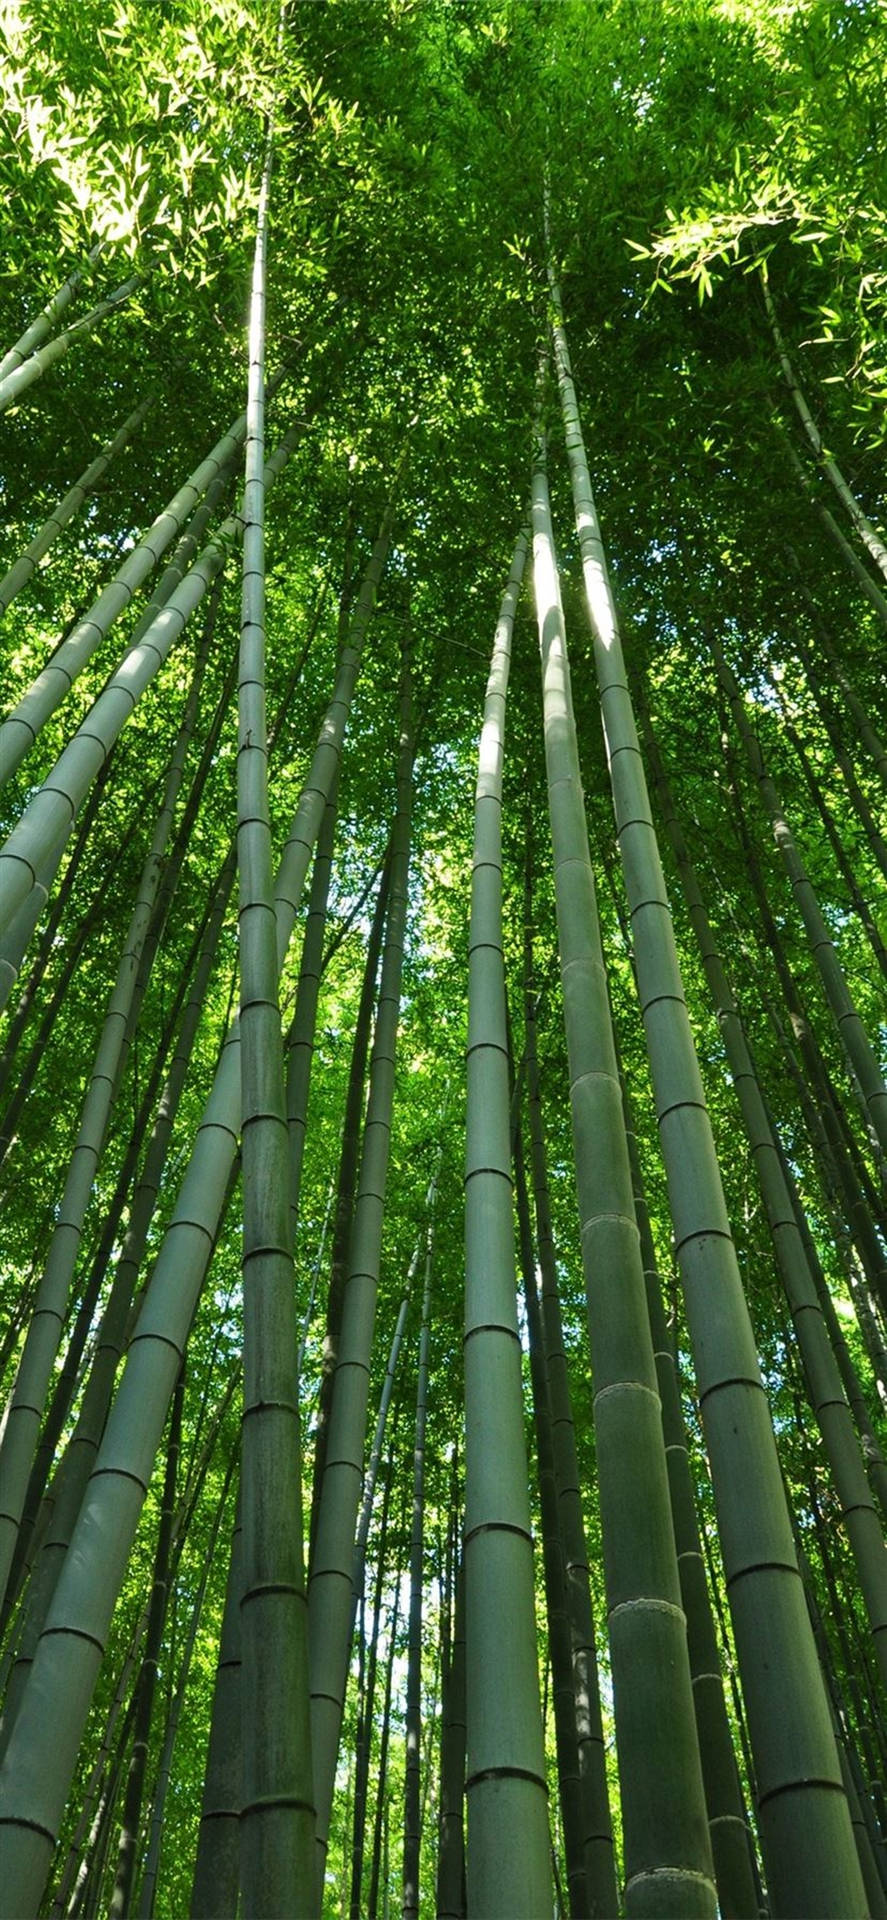 Bamboo Culm And Leaves IPhone Wallpaper